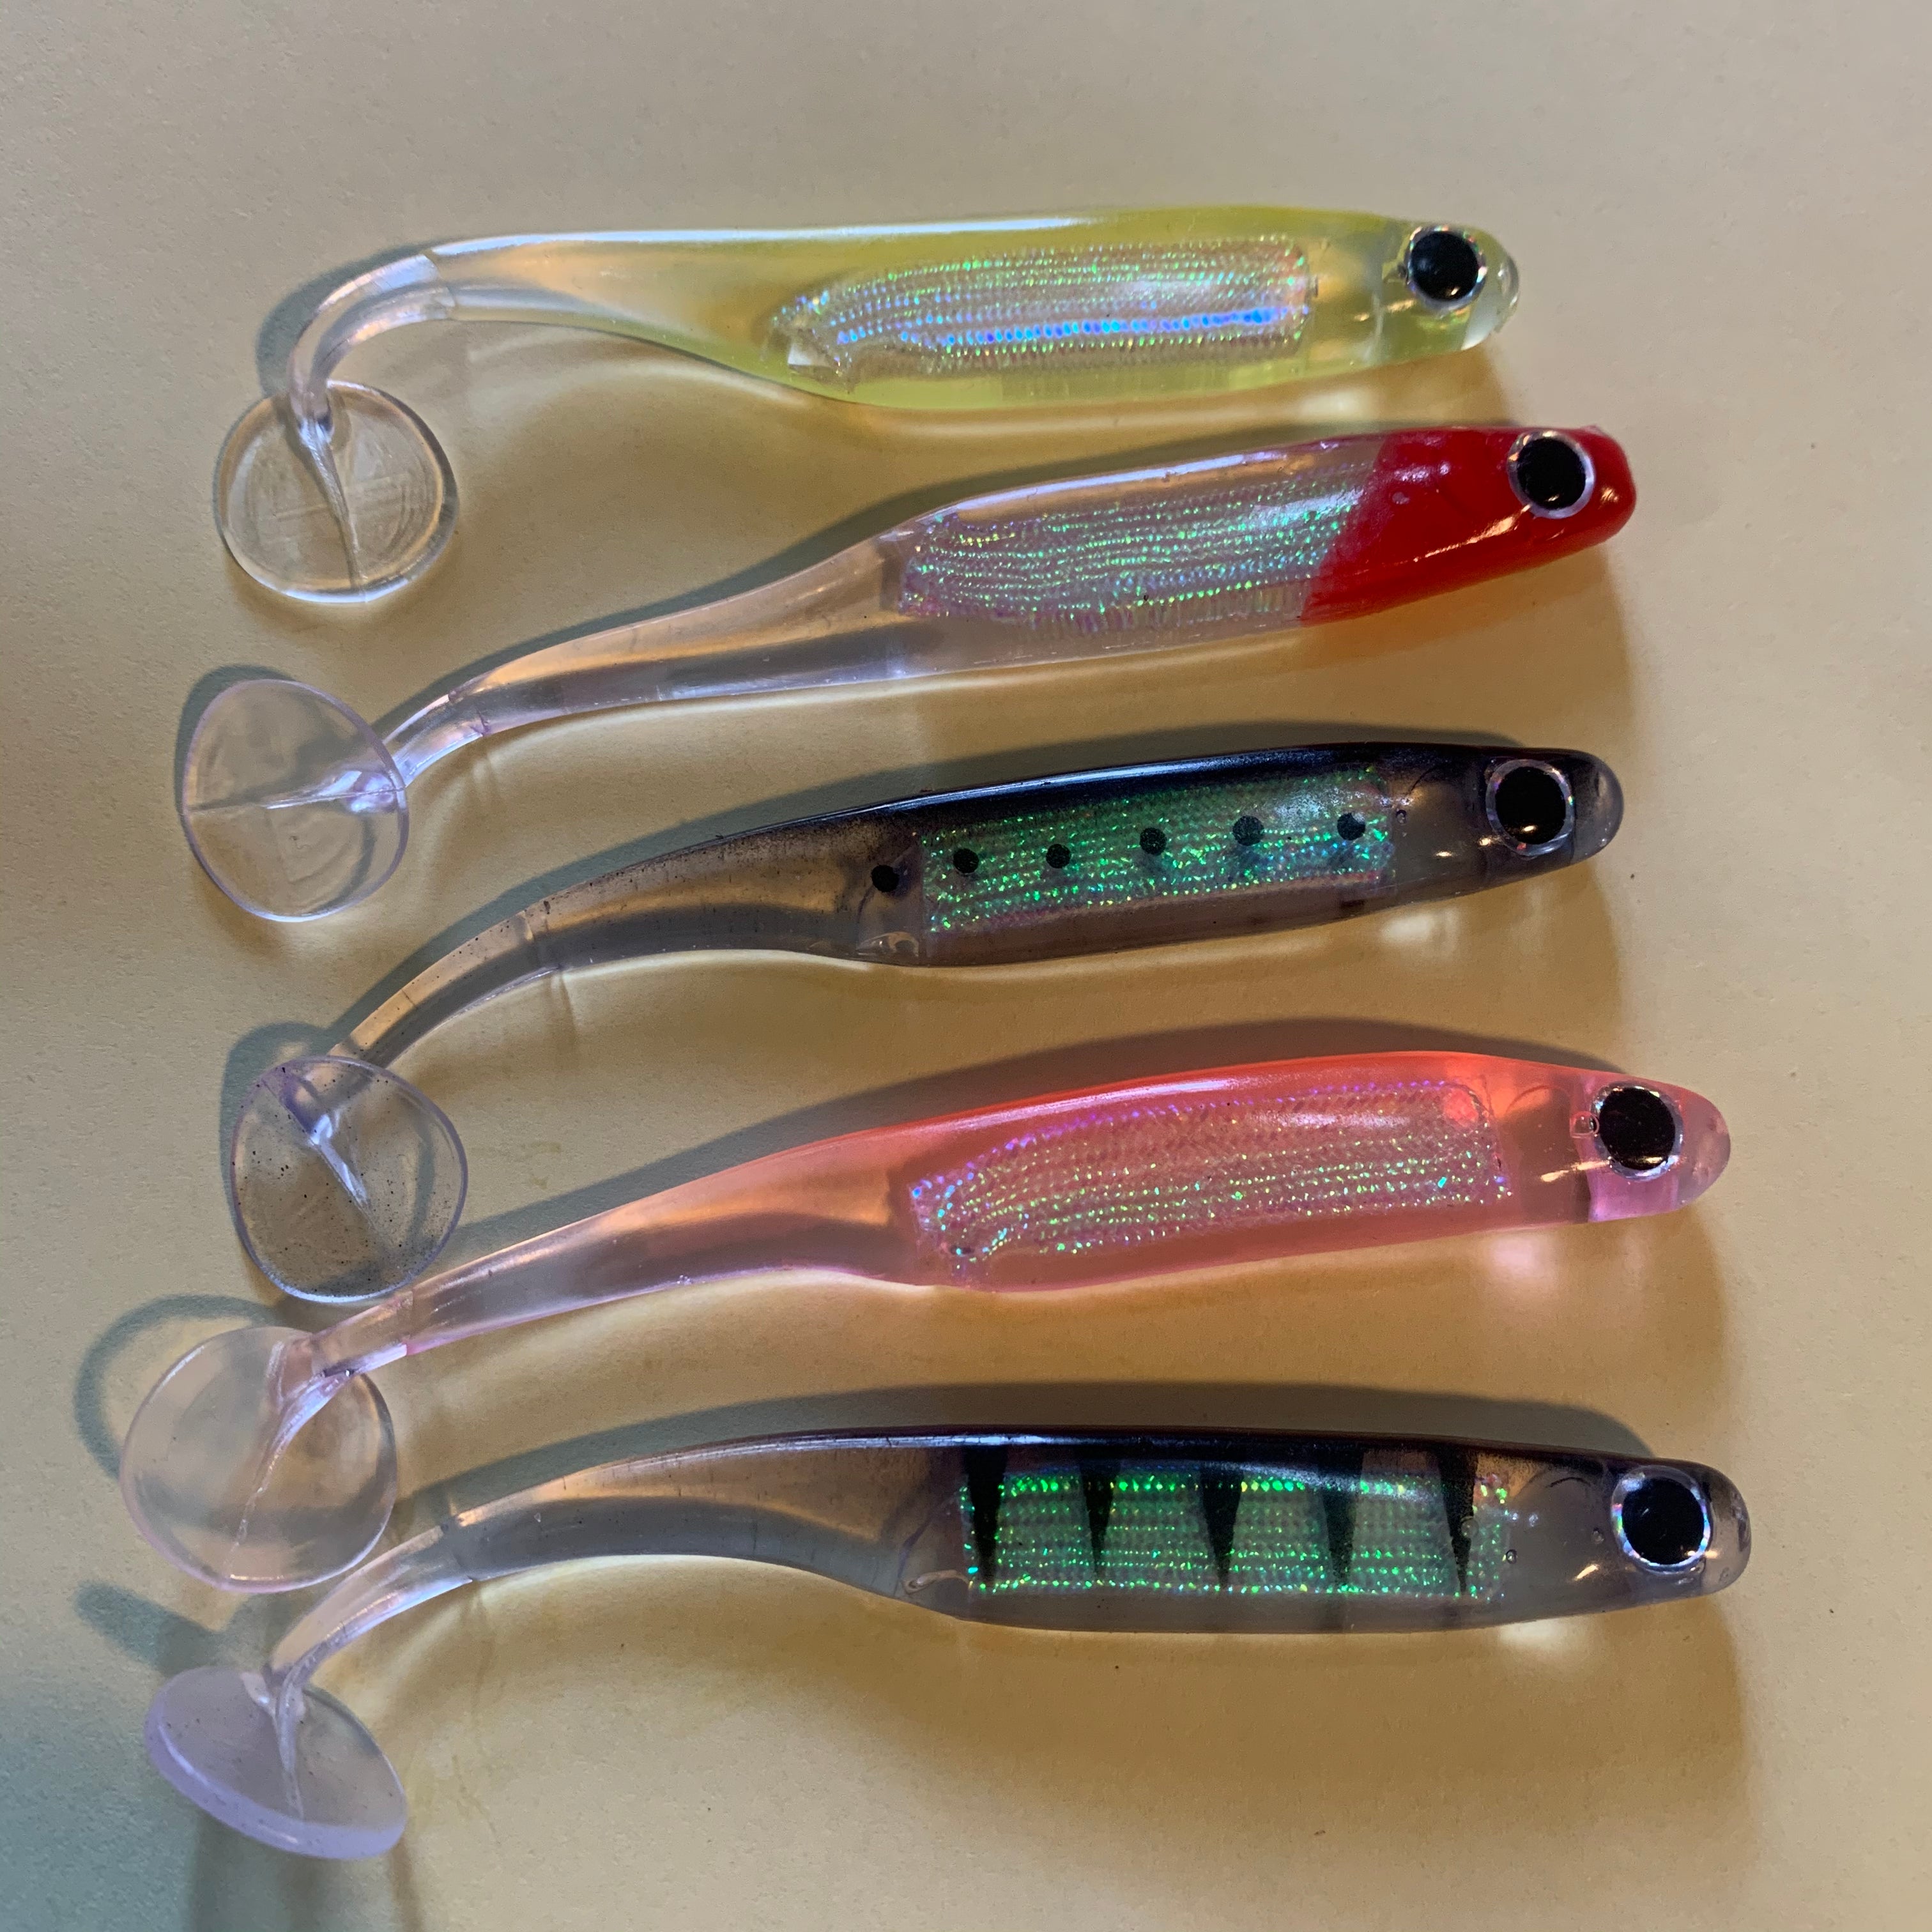 Fishing Lure Soft plastic paddle tail shads(5 Pack)